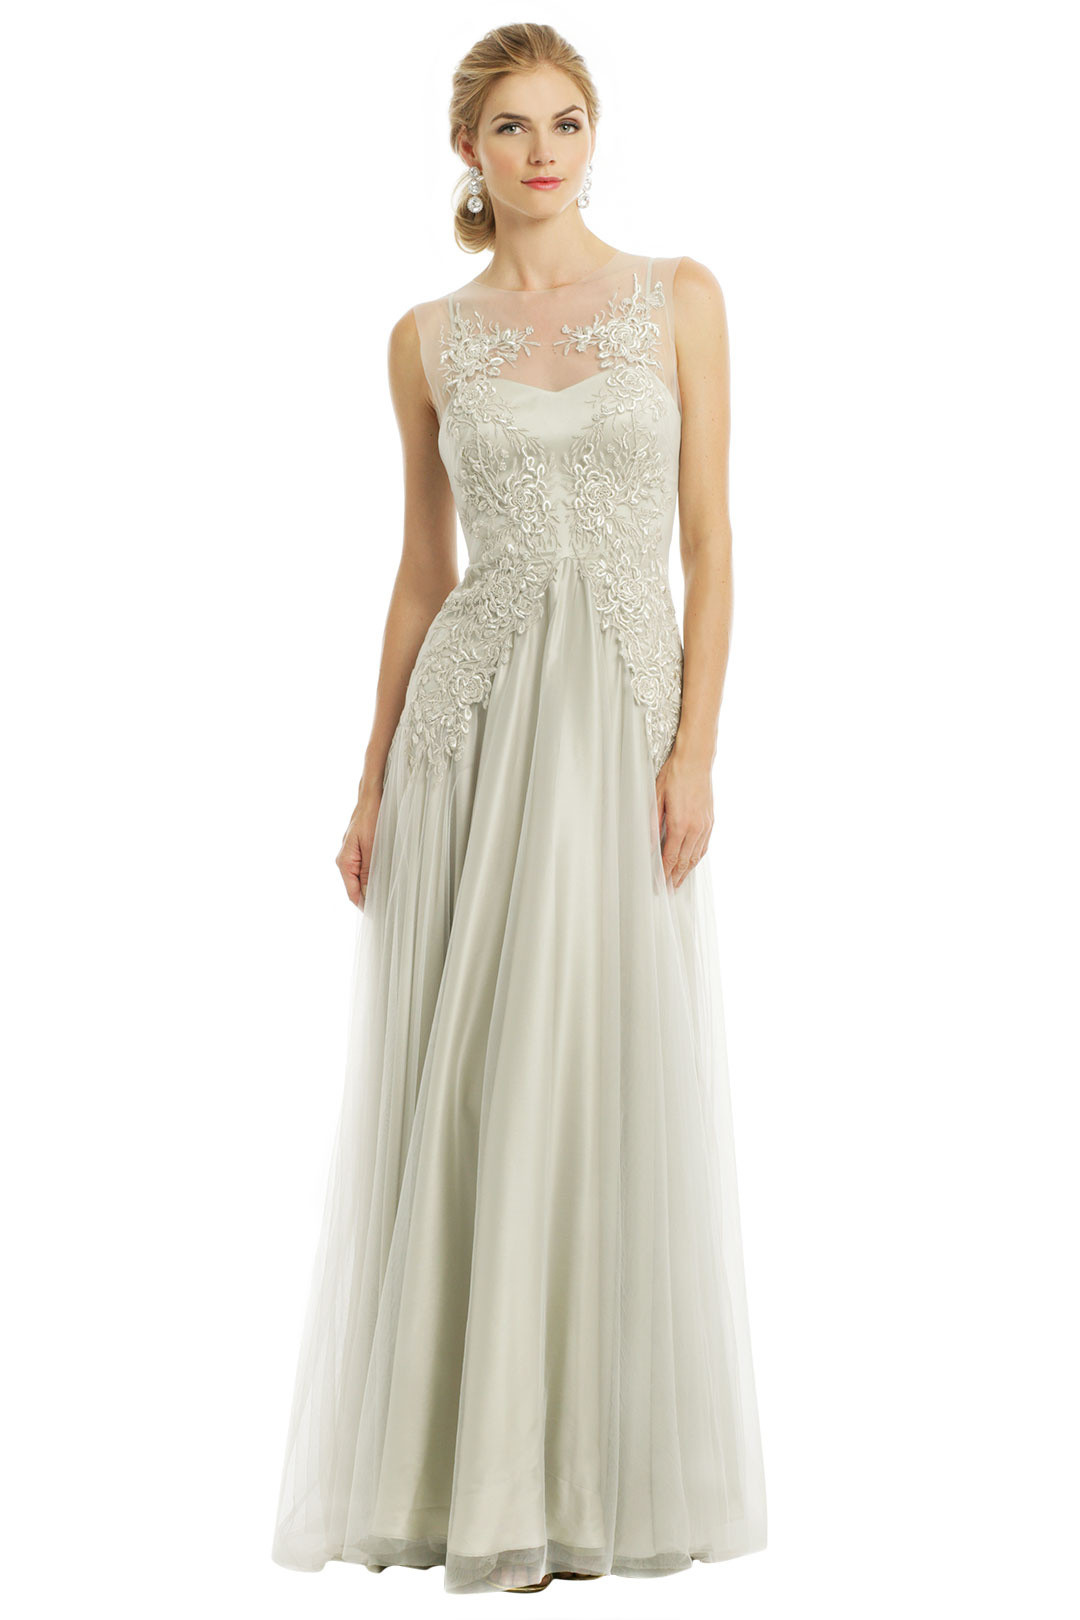 Rent Wedding Gowns
 What to Wear Designer Dresses to Rent for Any Kind of